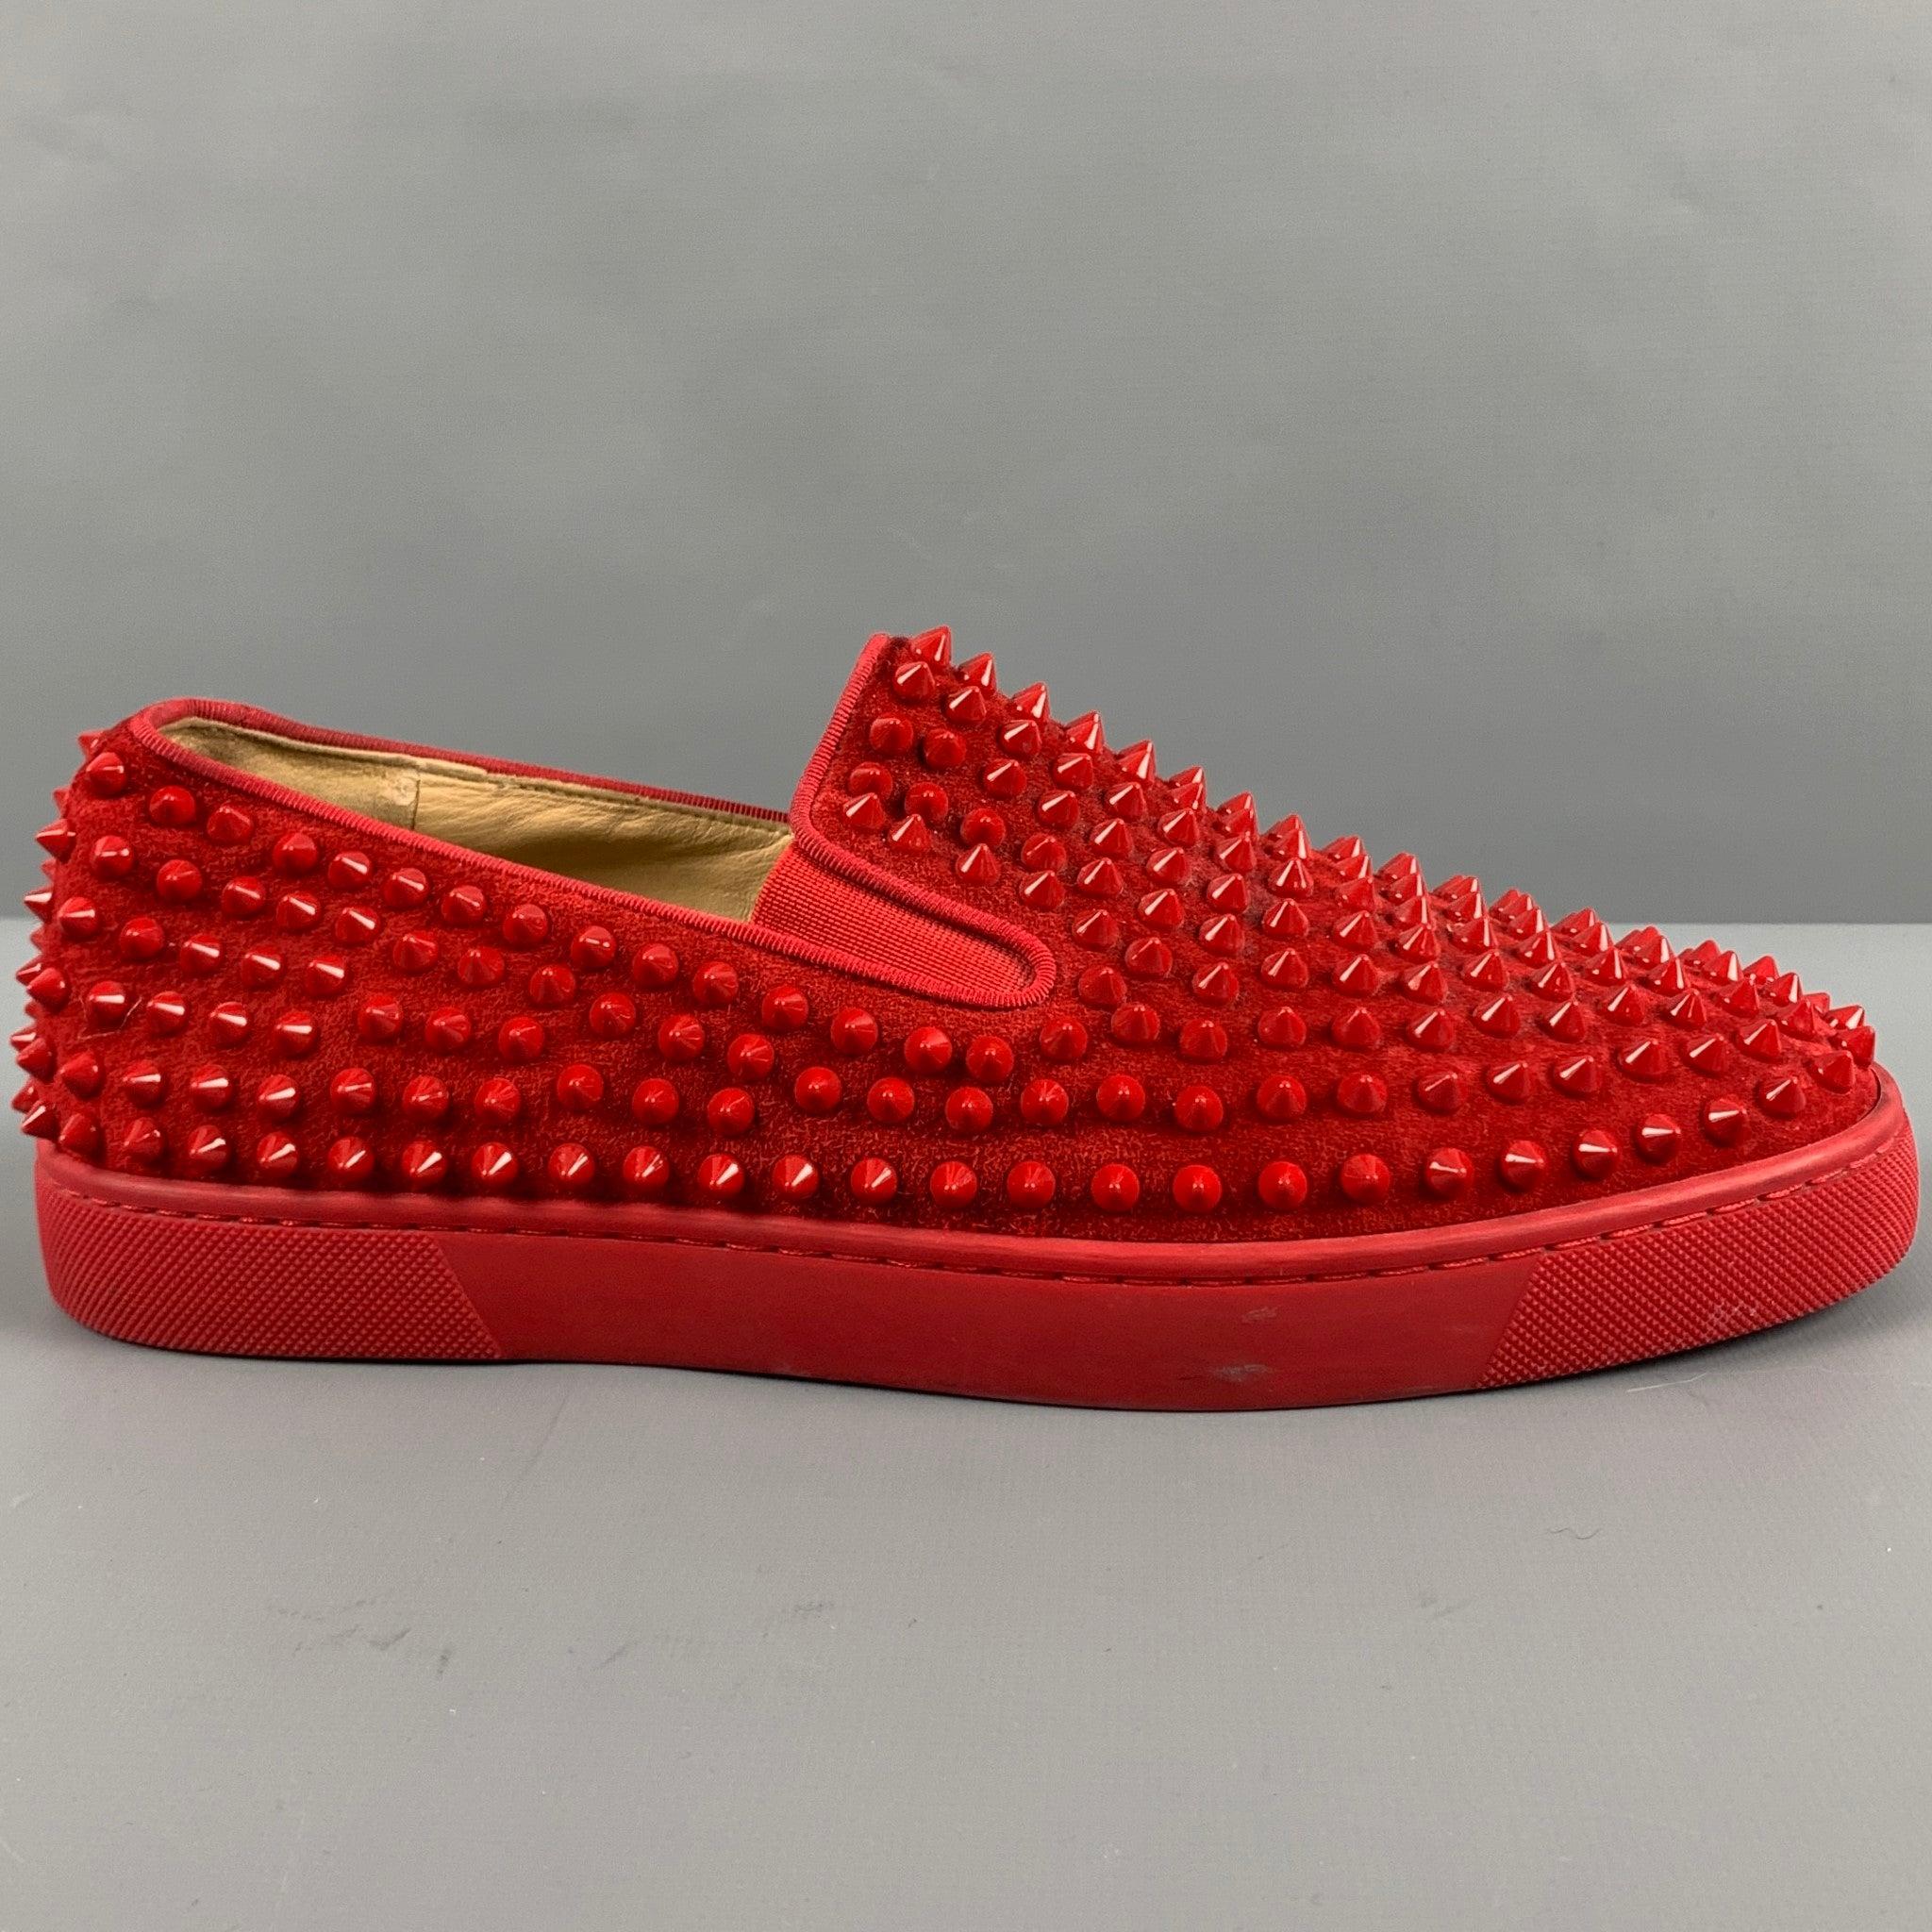 CHRISTIAN LOUBOUTIN sneakers
in a red leather featuring all over studs, a slip on style, and signature red sole.Very Good Pre-Owned Condition.
Minor signs of wear. 

Marked:   41Outsole: 11 inches  x 4 in
  
  
 
Reference: 127783
Category: